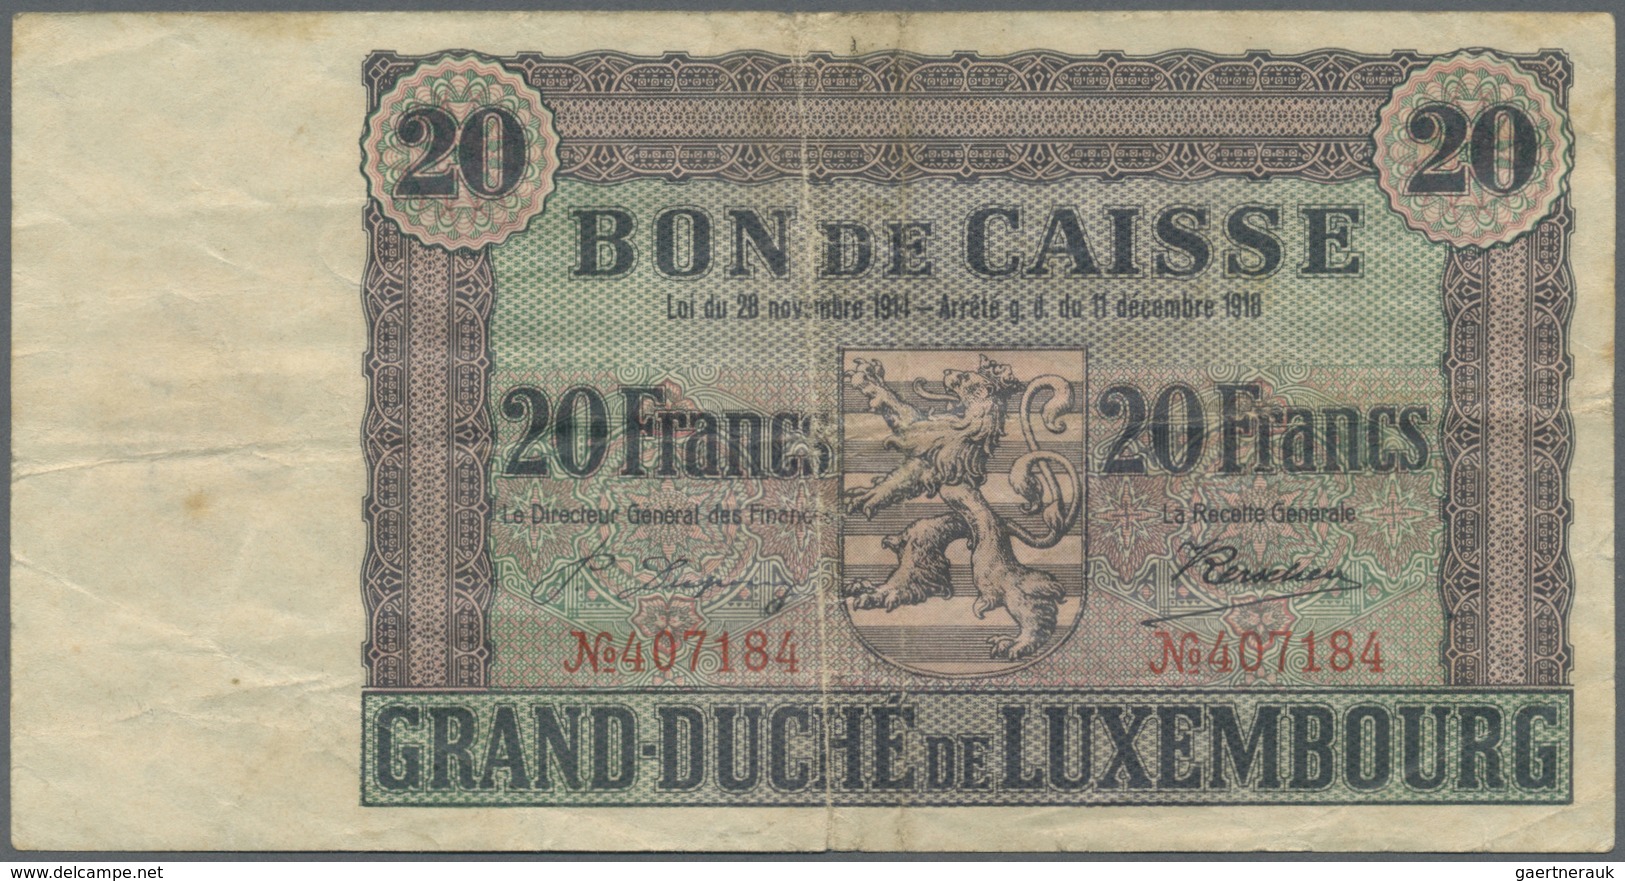 Luxembourg: 20 Francs L.1918 P. 35, Rare Issue In Nice Condition For This Type, No Holes Or Tears, J - Luxembourg